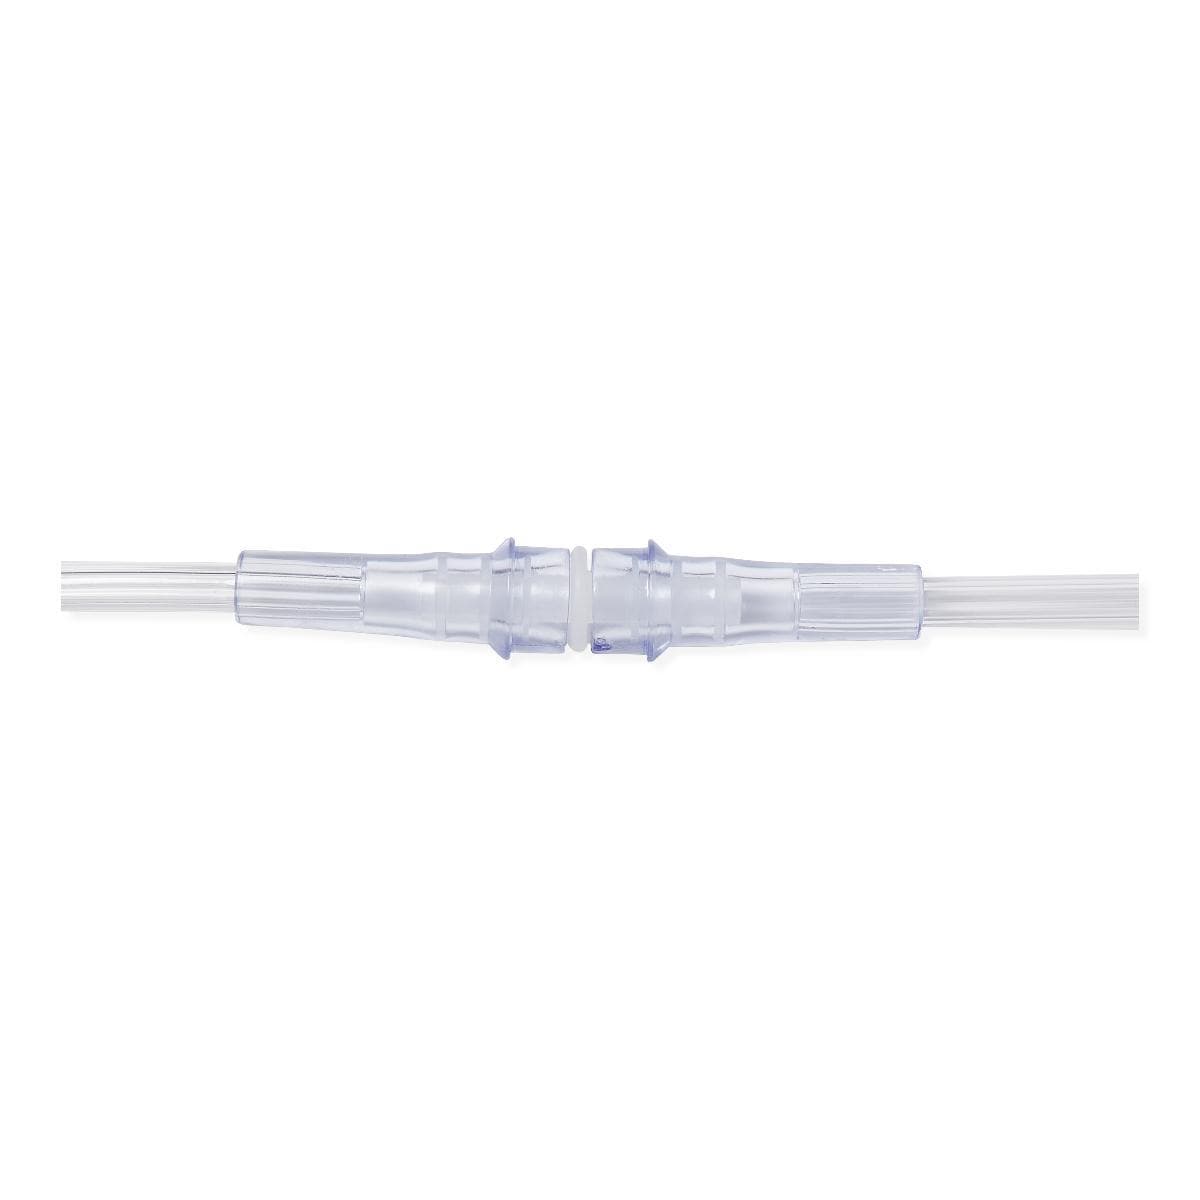 Medline Oxygen Adapters and Connectors - Senior.com Oxygen Adapters & Connectors